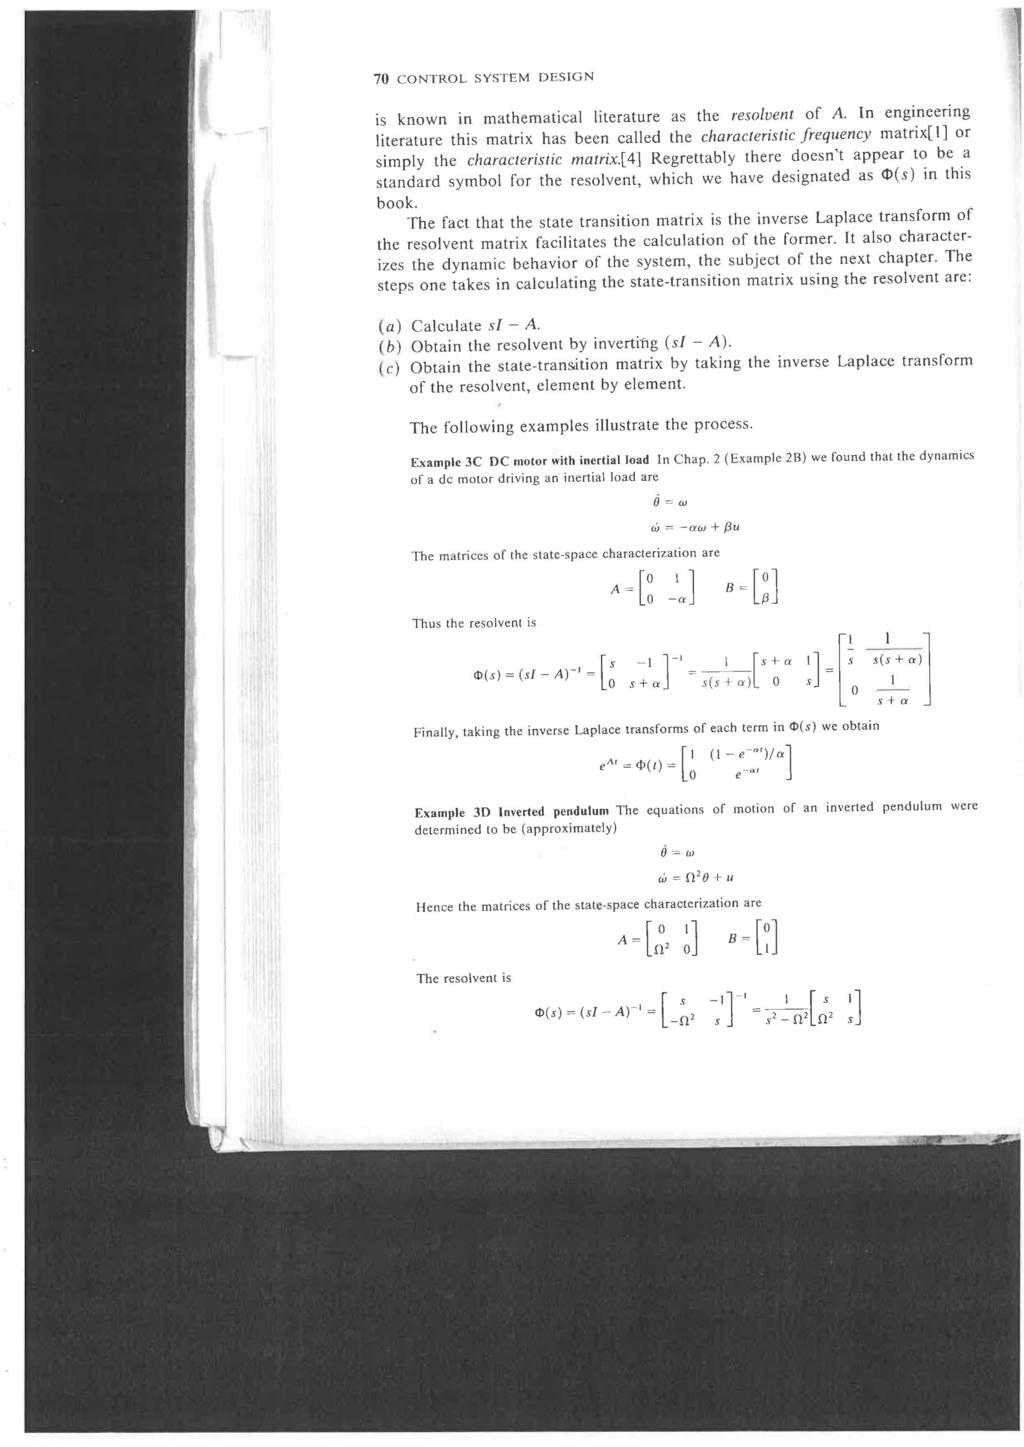 70 CONTROL SYSTEM DESIGN 11! is known in mathematical literature as the resolvent of A.